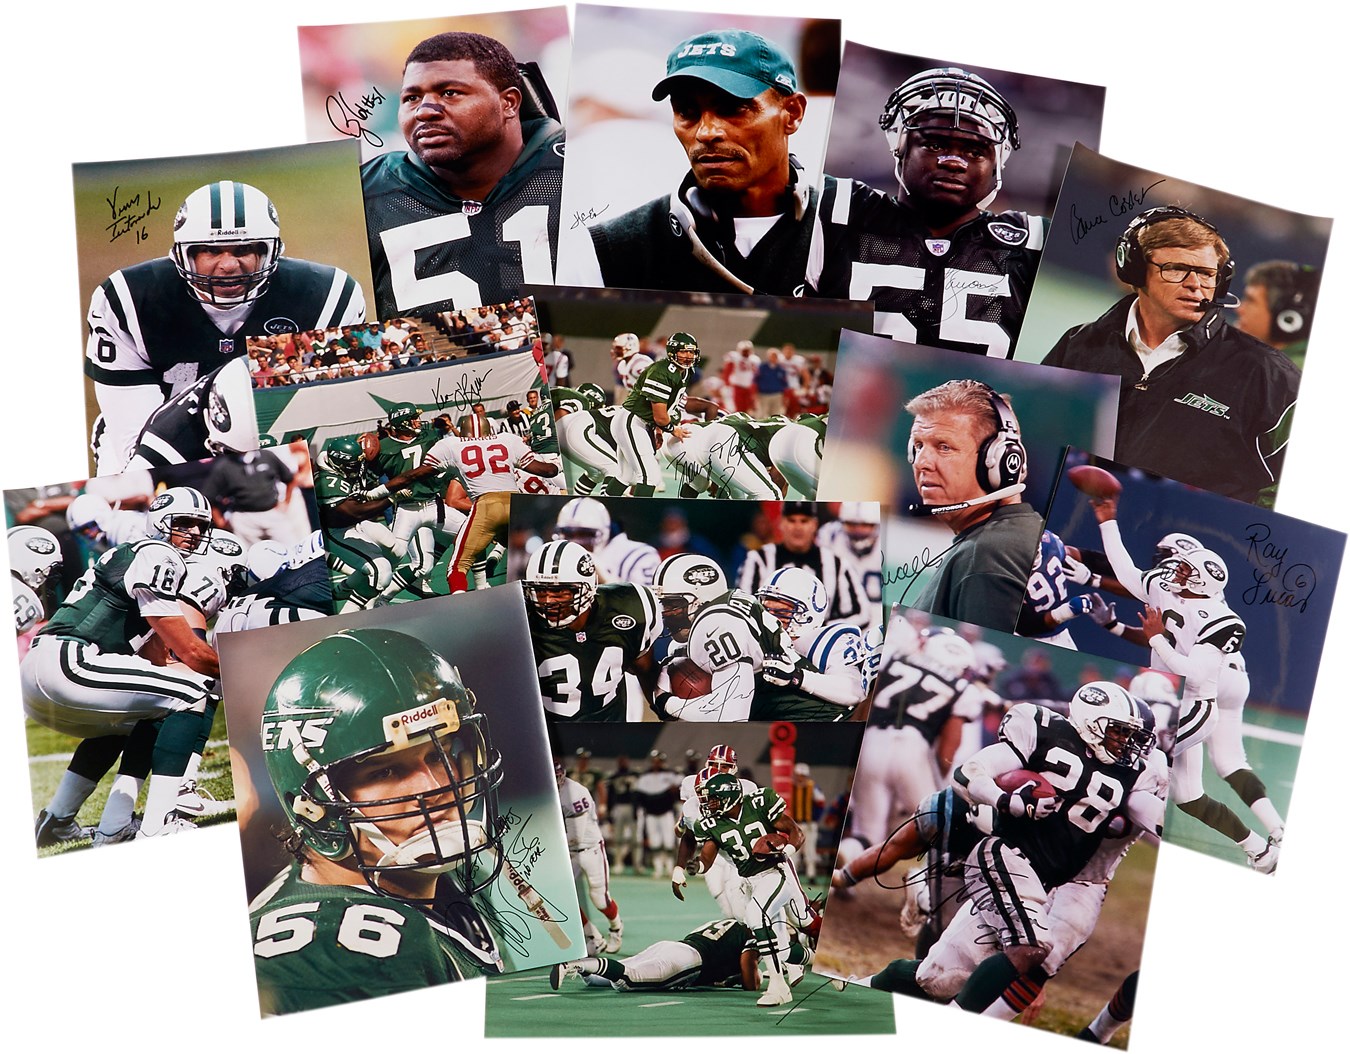 Football - 1980s-90s New York Jets Signed 16x20” In Person Signed Photographs from VIP Photographer Richard Brightly (14)